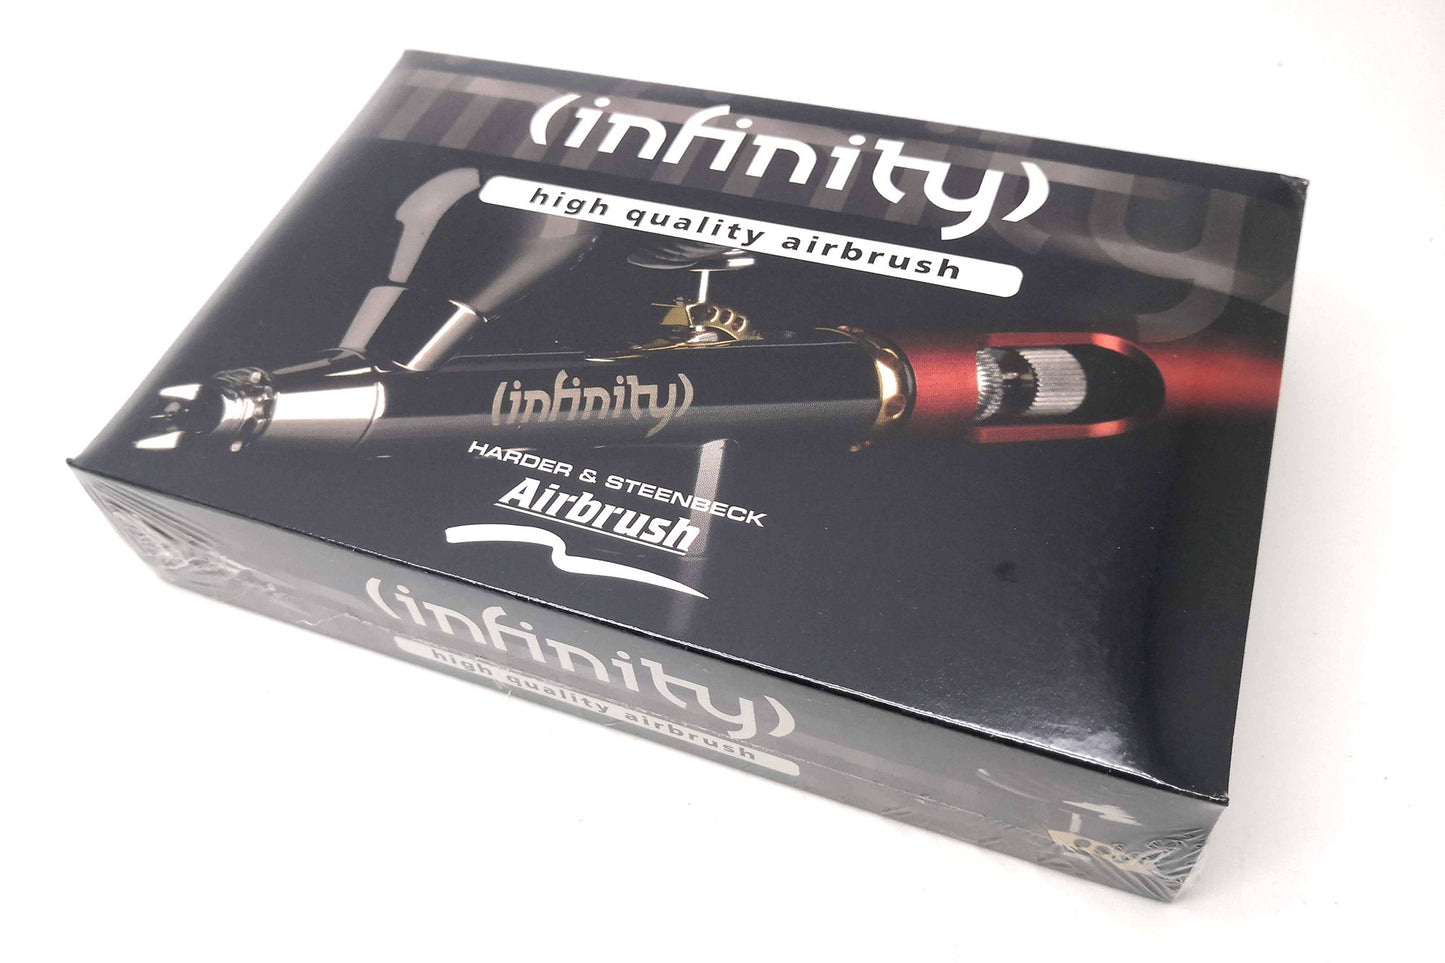 Harder & Steenbeck airbrush Infinity CR plus 2in 1 (0.15 & 0.4mm nozzle)